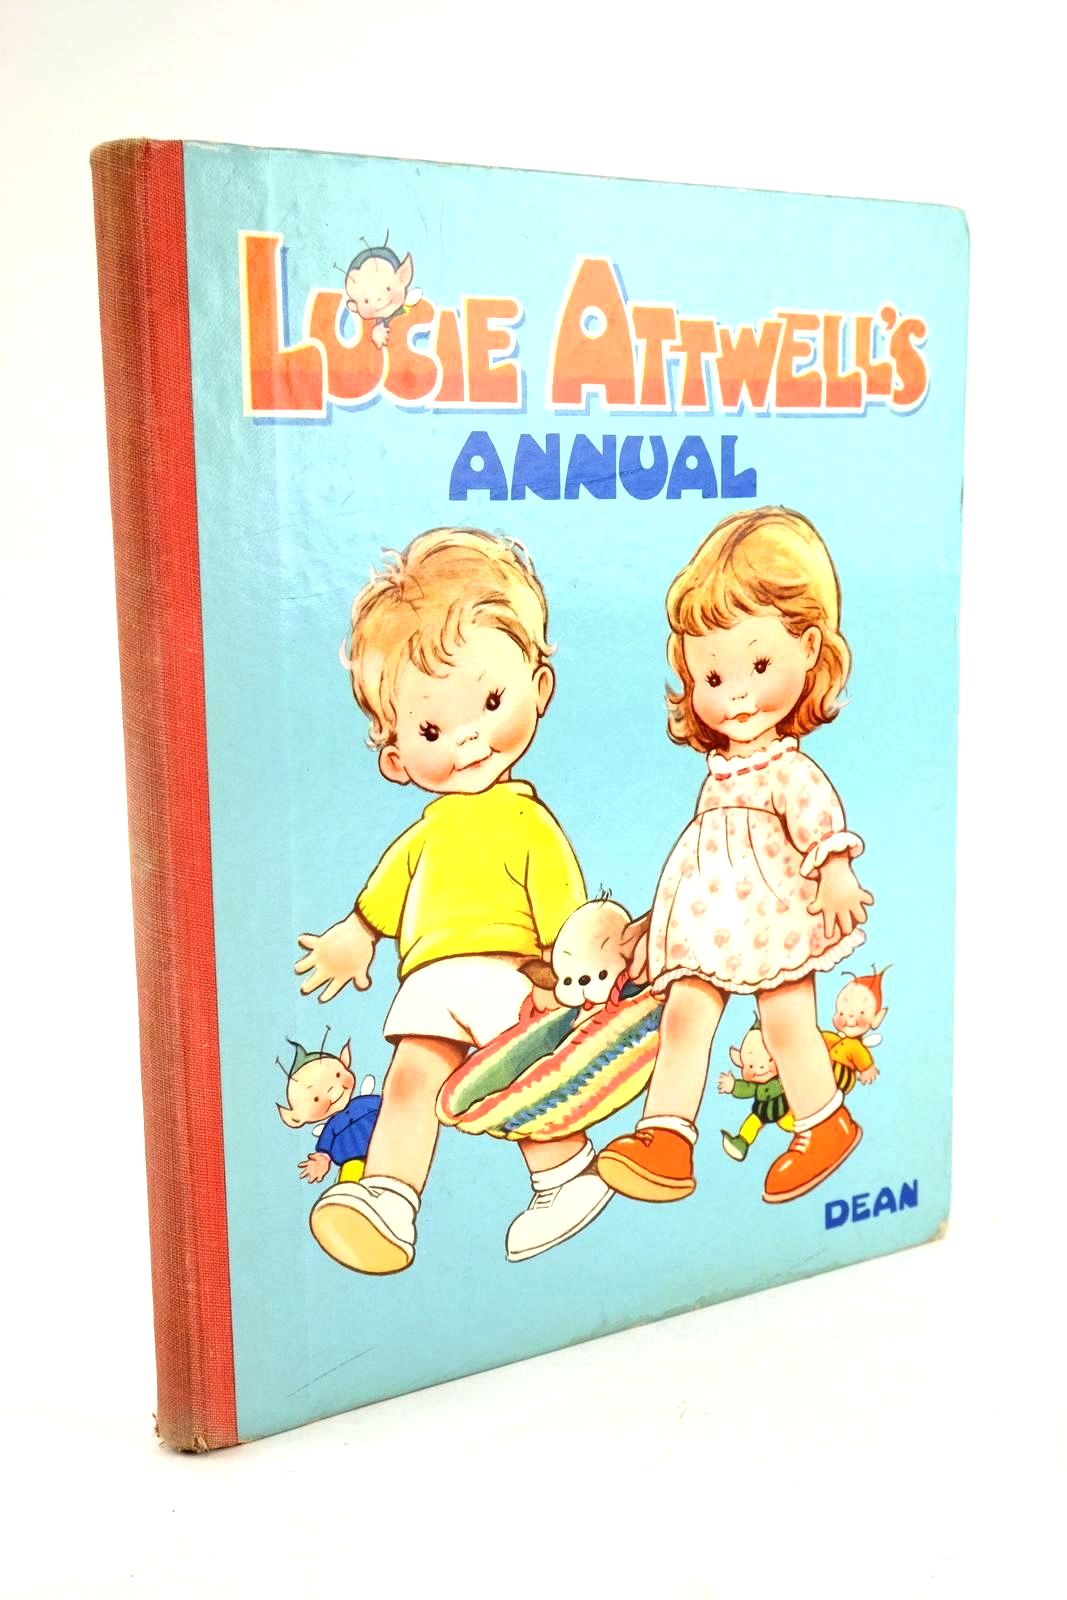 Photo of LUCIE ATTWELL'S ANNUAL 1959 written by Attwell, Mabel Lucie
Griffiths, Charles
Close, Eunice
et al,  illustrated by Attwell, Mabel Lucie published by Dean & Son Ltd. (STOCK CODE: 1324235)  for sale by Stella & Rose's Books